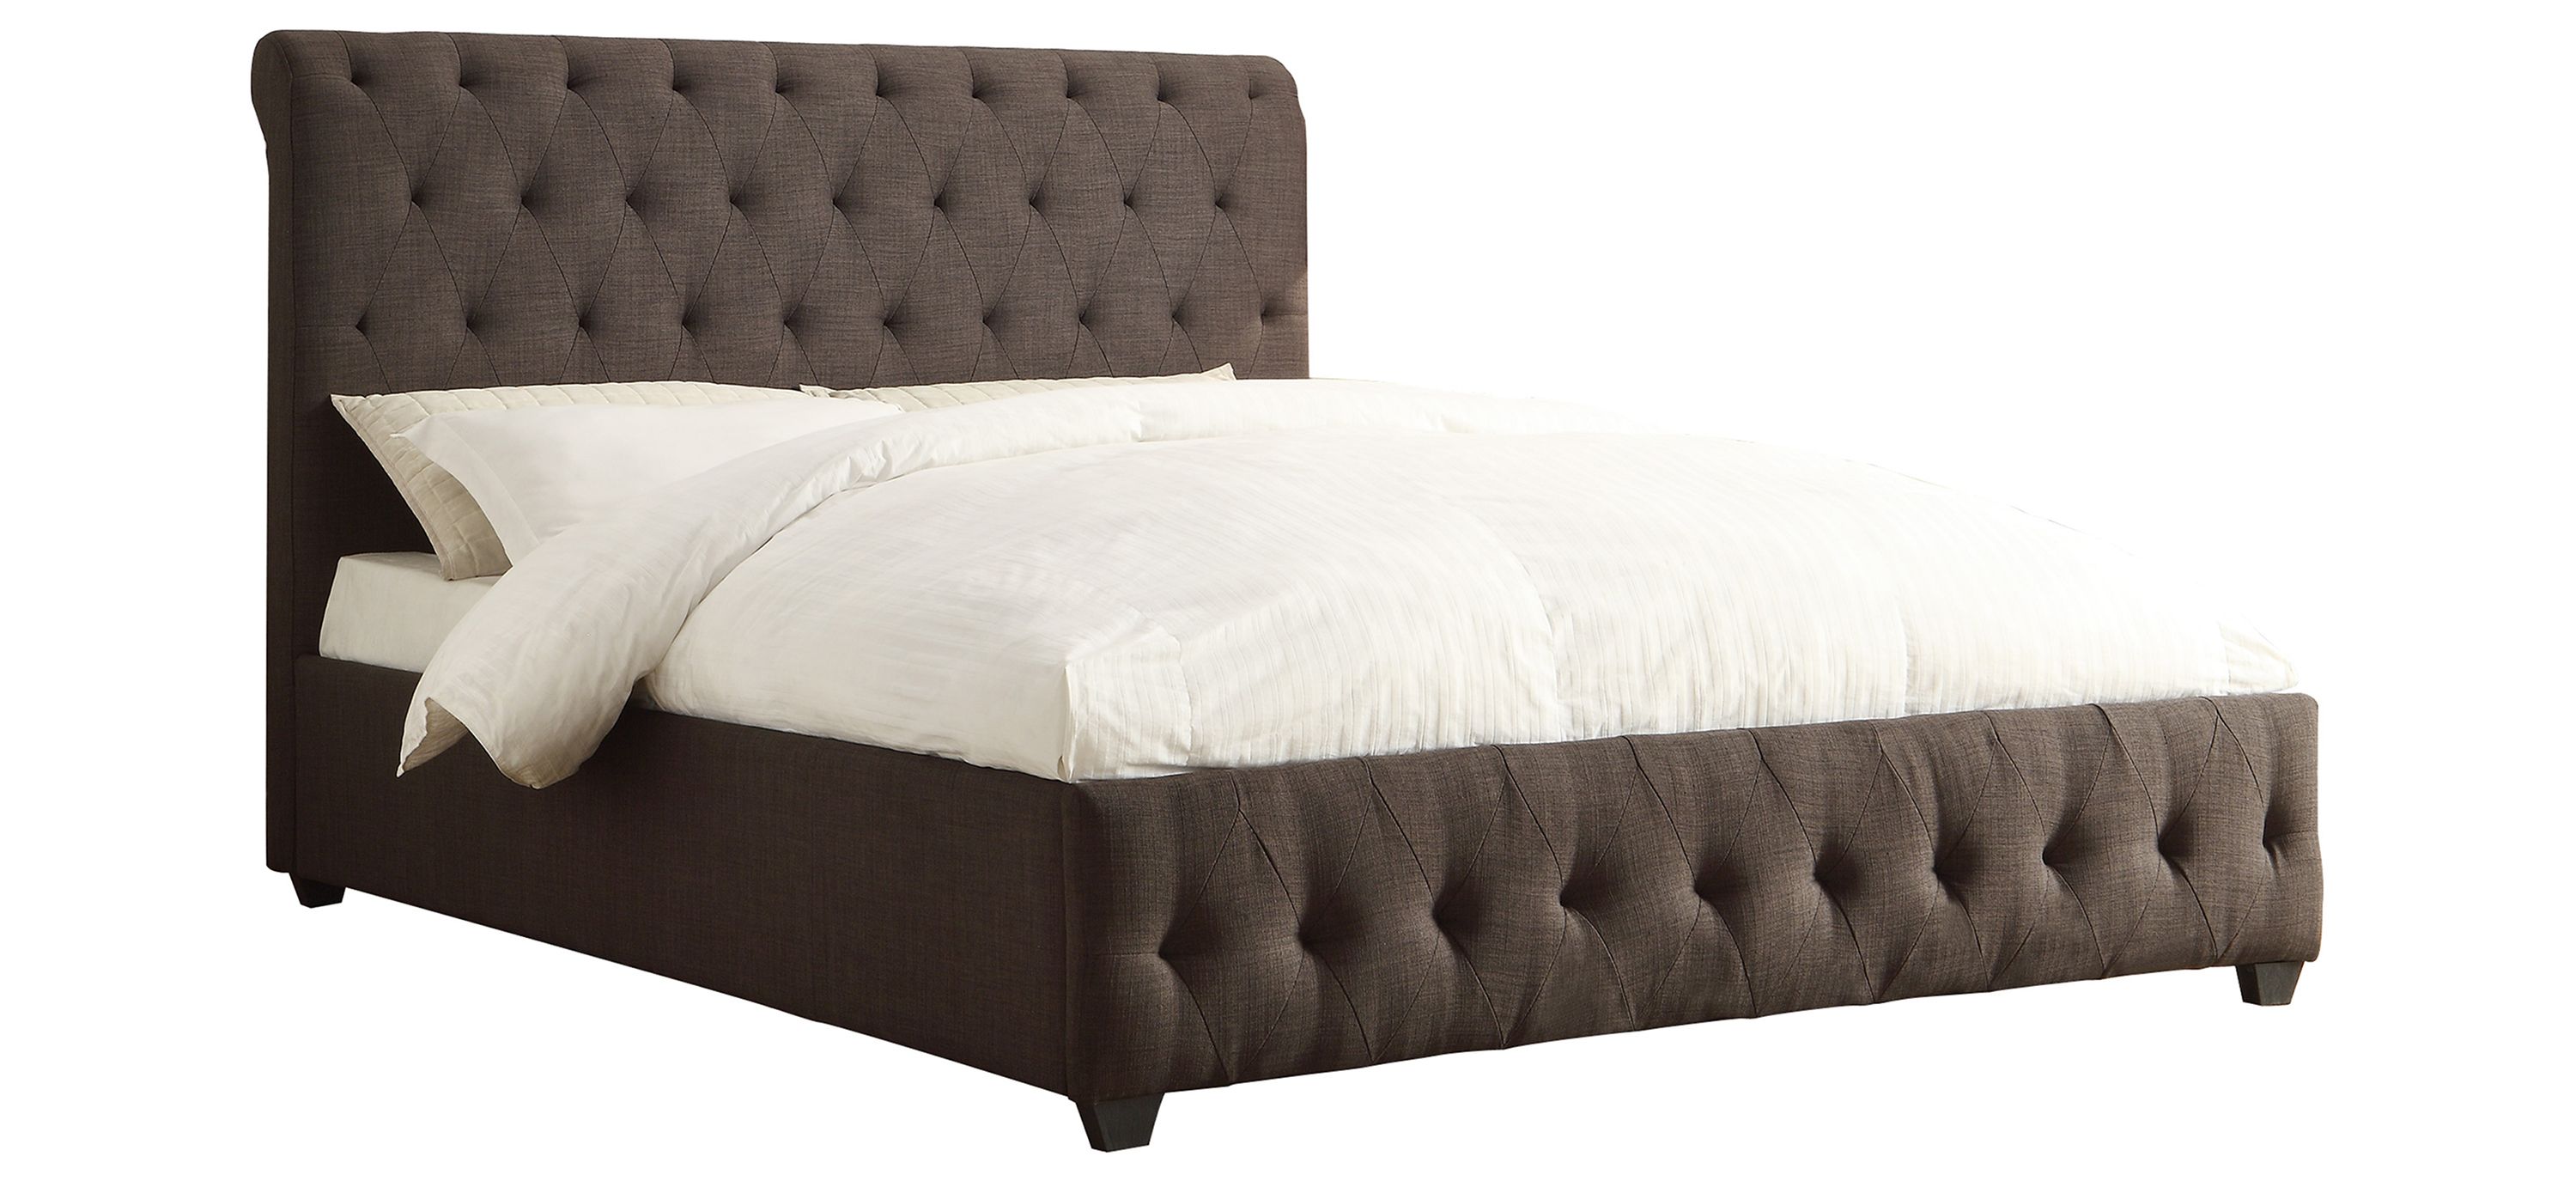 Carlow Upholstered Bed